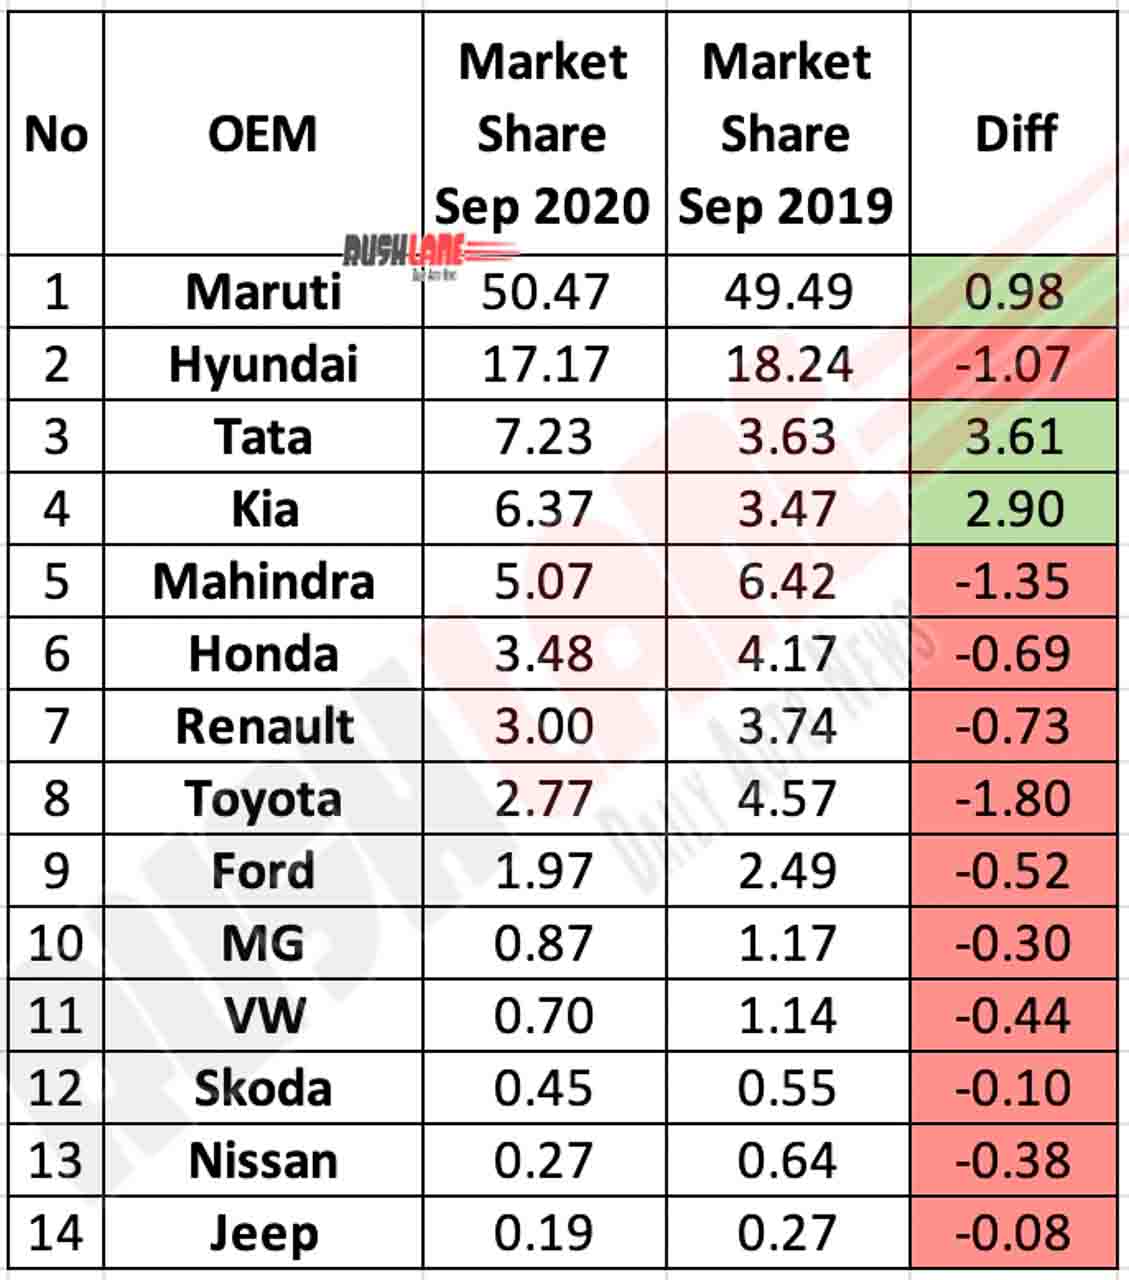 Tata Motors Records Highest Market Share Increase For Sep 2020